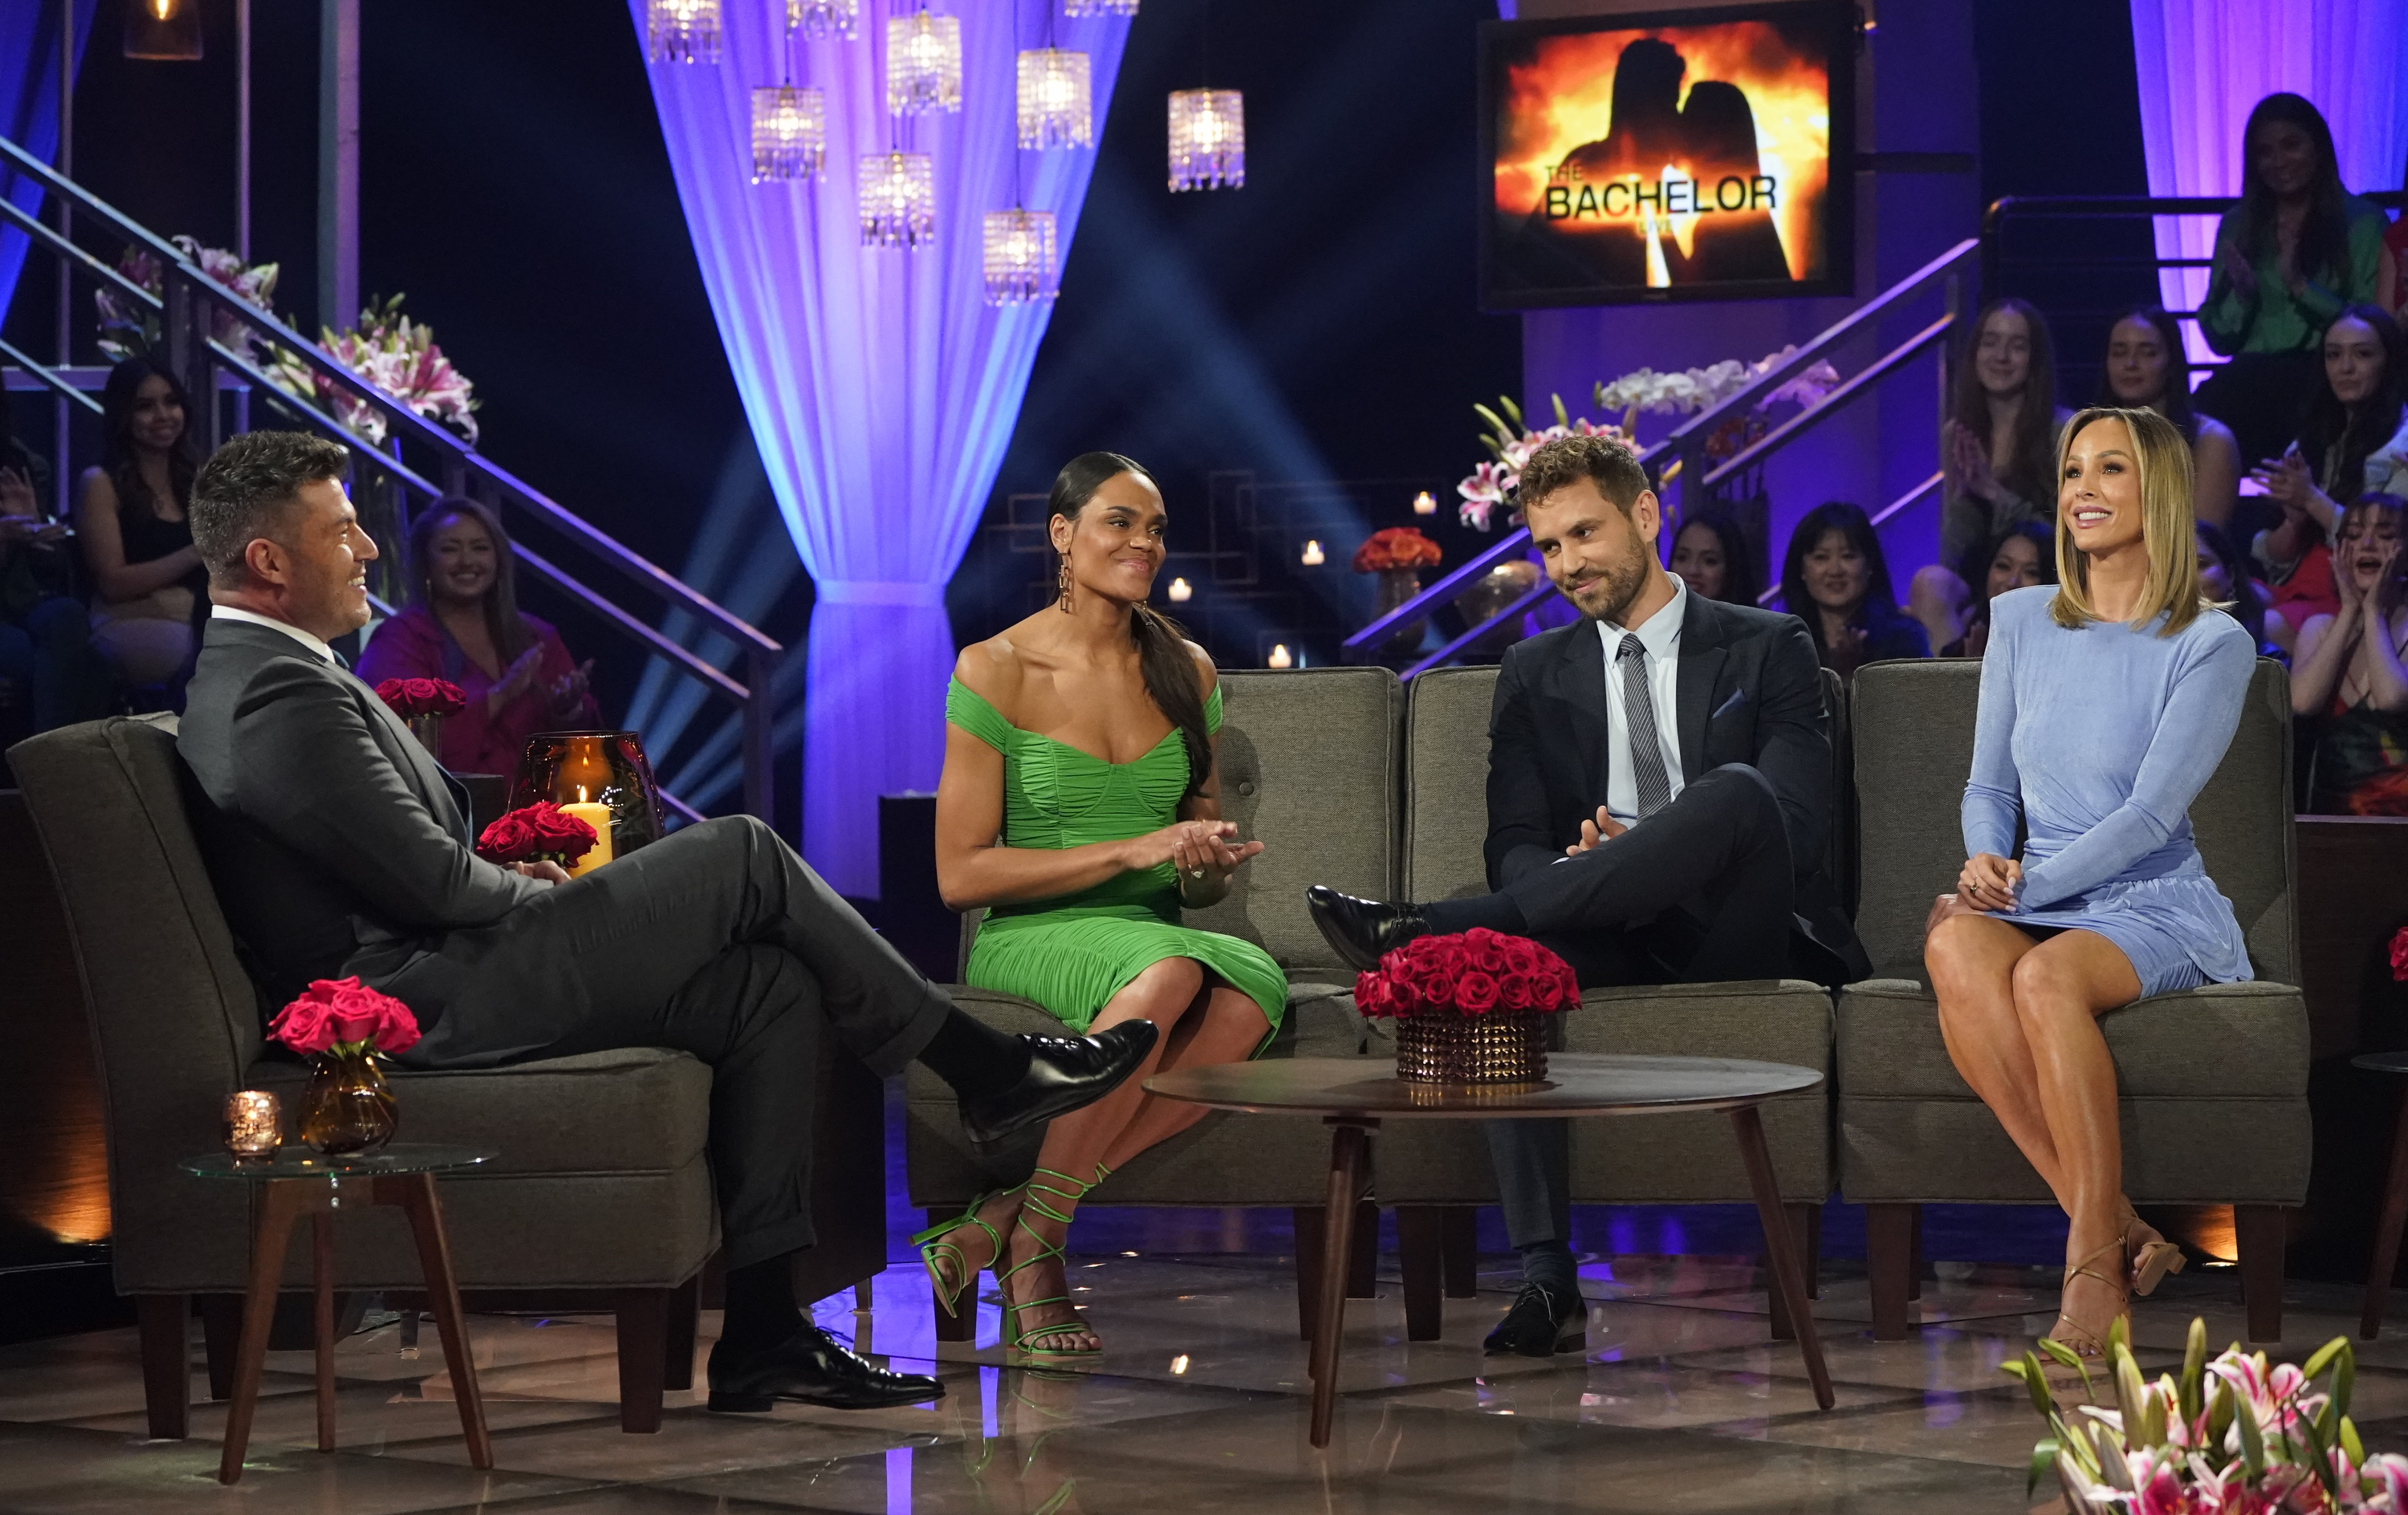 Jesse Palmer, Michelle Young, Nick Viall, and Clare Crawley during 'The Bachelor' finale for Clayton Echard's season